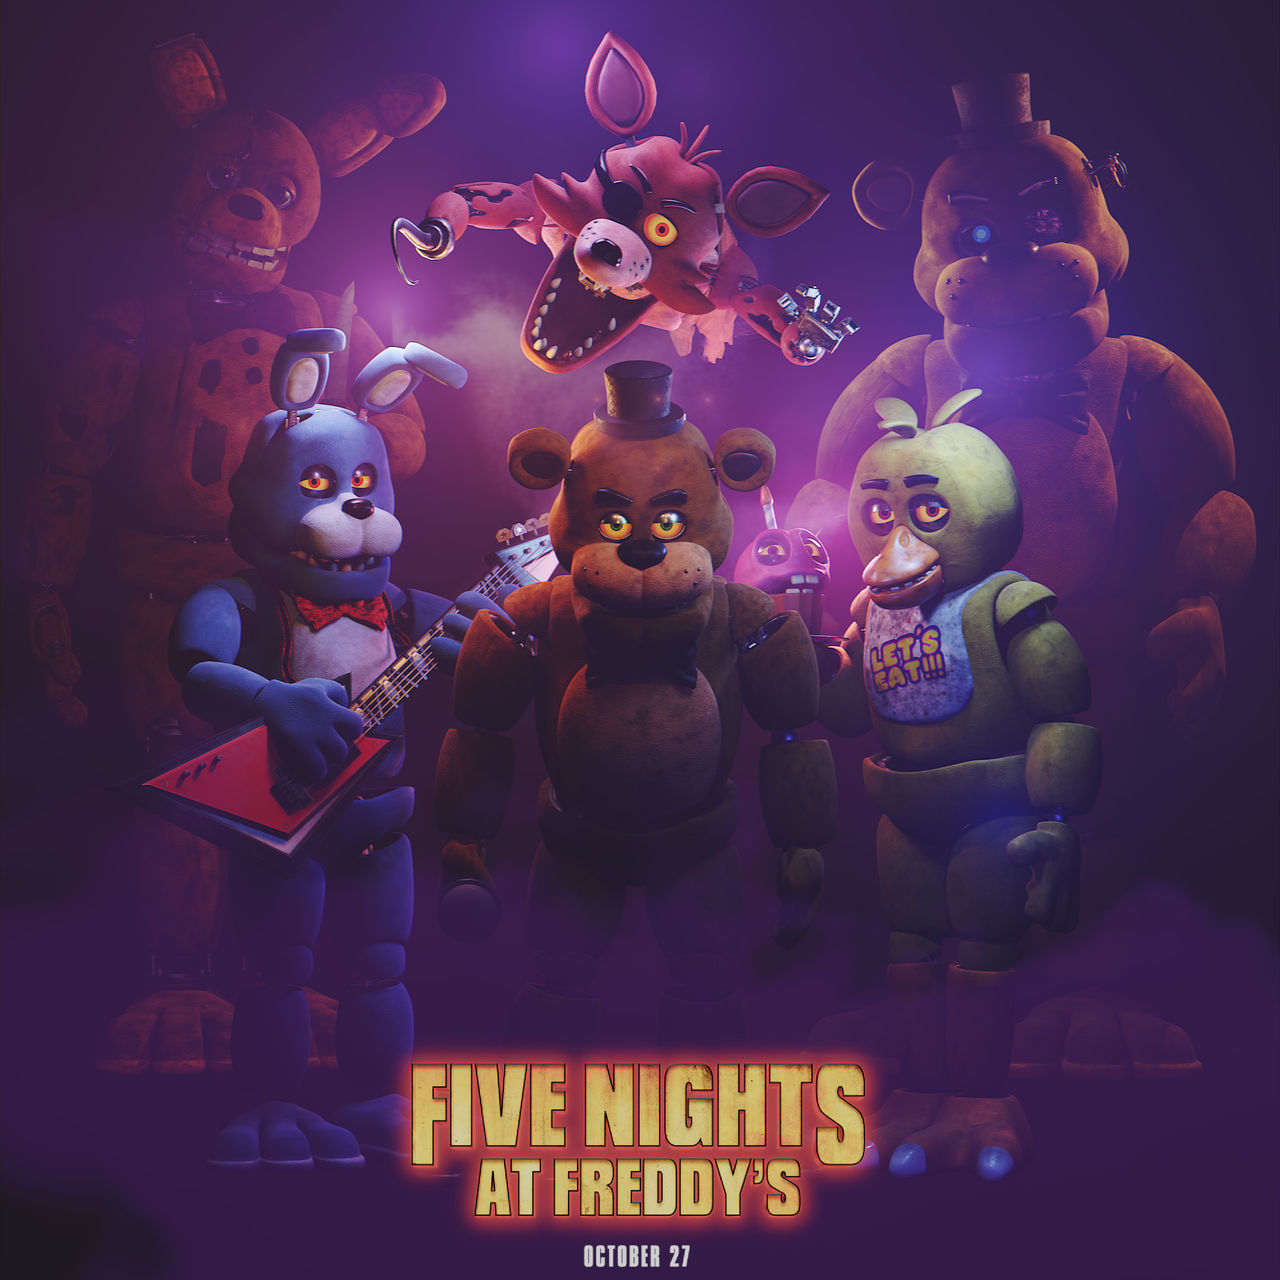 Five Nights At Freddy's - The Animated Movie 